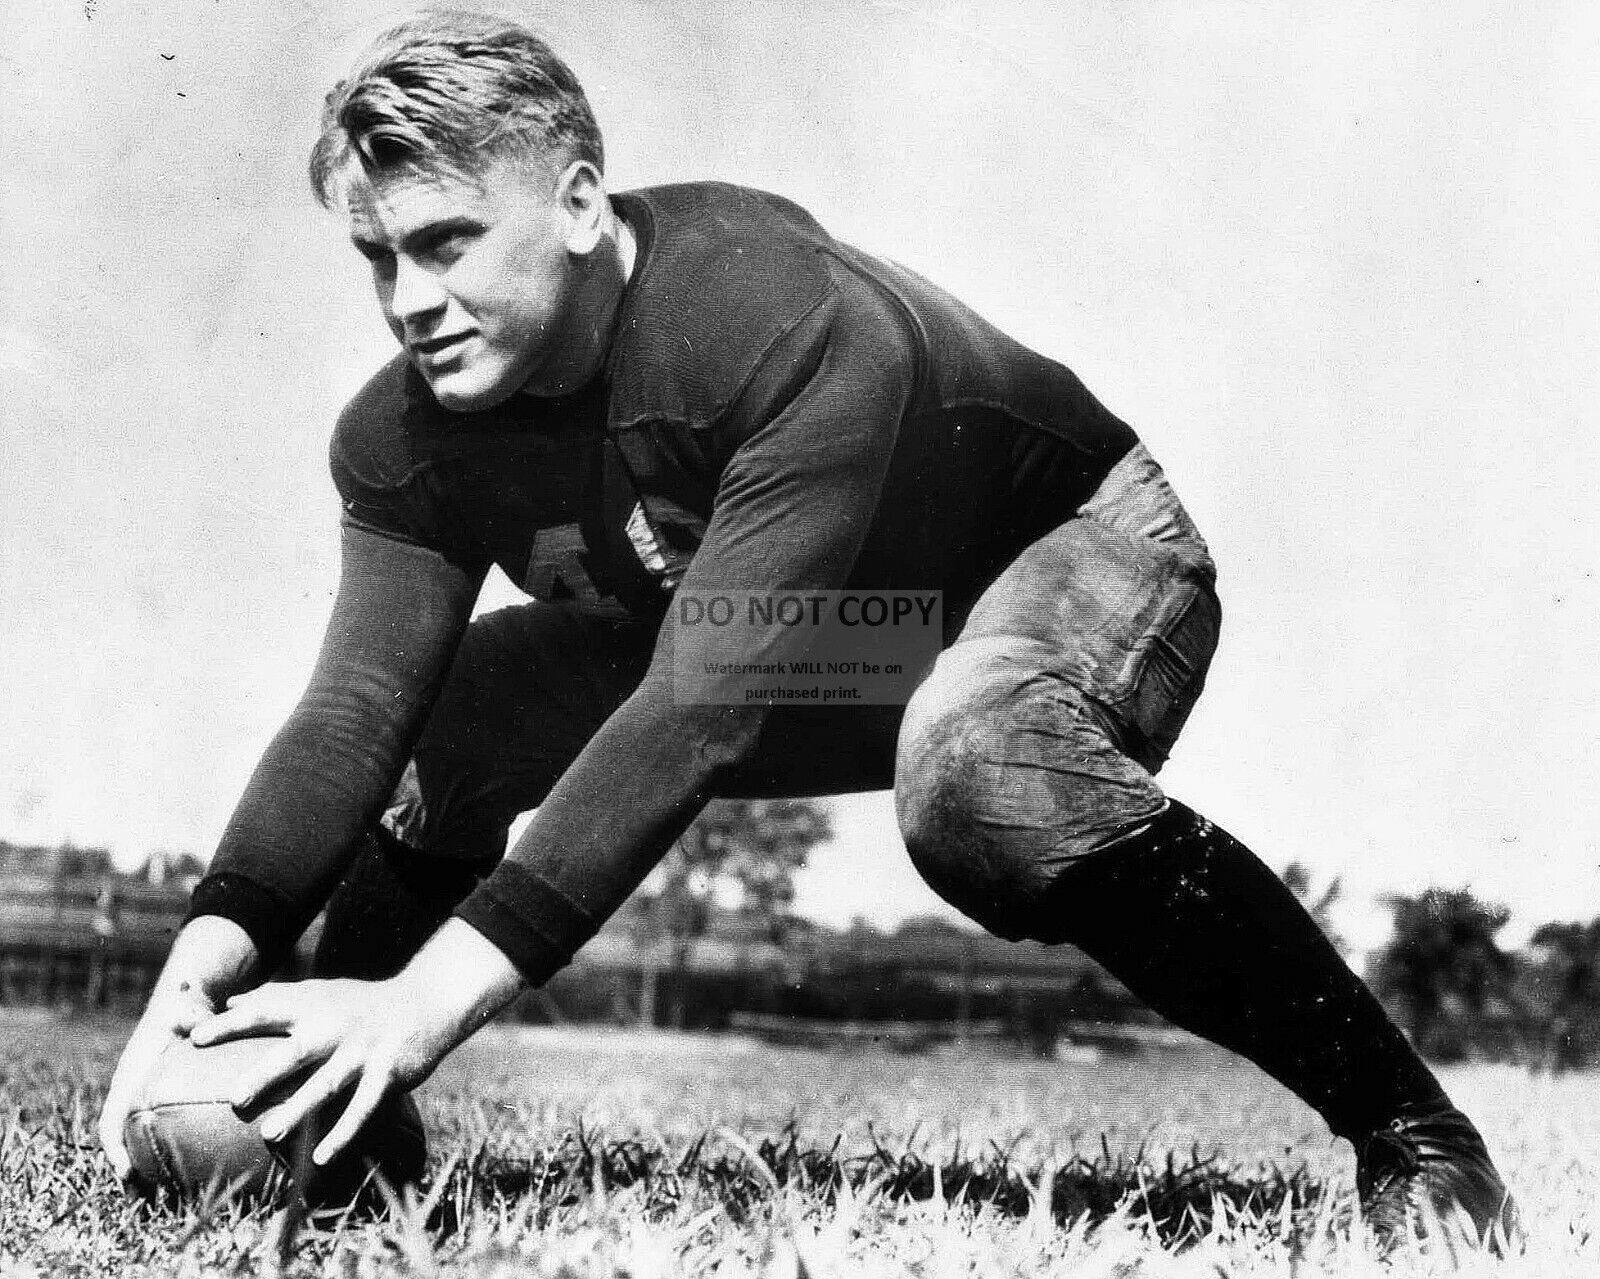 GERALD FORD ON THE FOOTBALL FIELD AT MICHIGAN IN 1933 - 8X10 PHOTO (BB-146)